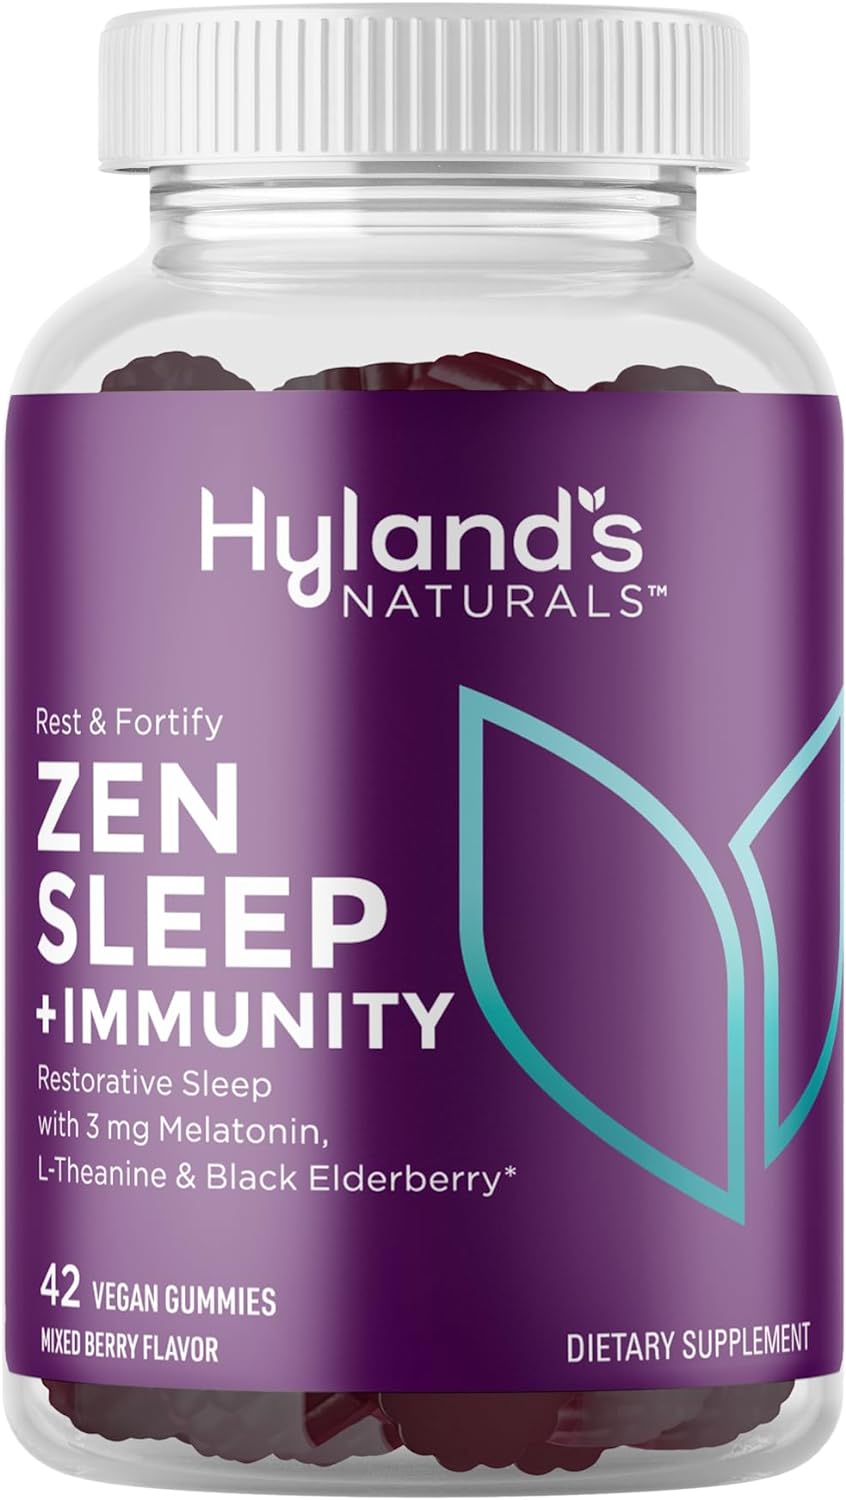 Hyland's Naturals Rest & Fortify Zen Sleep Aid + Immune Support - 42 Vegan Gummies - with Melatonin + L-Theanine for Sleep Support and Organic Black Elderberry, Vitamin C and Zinc for Immune Support